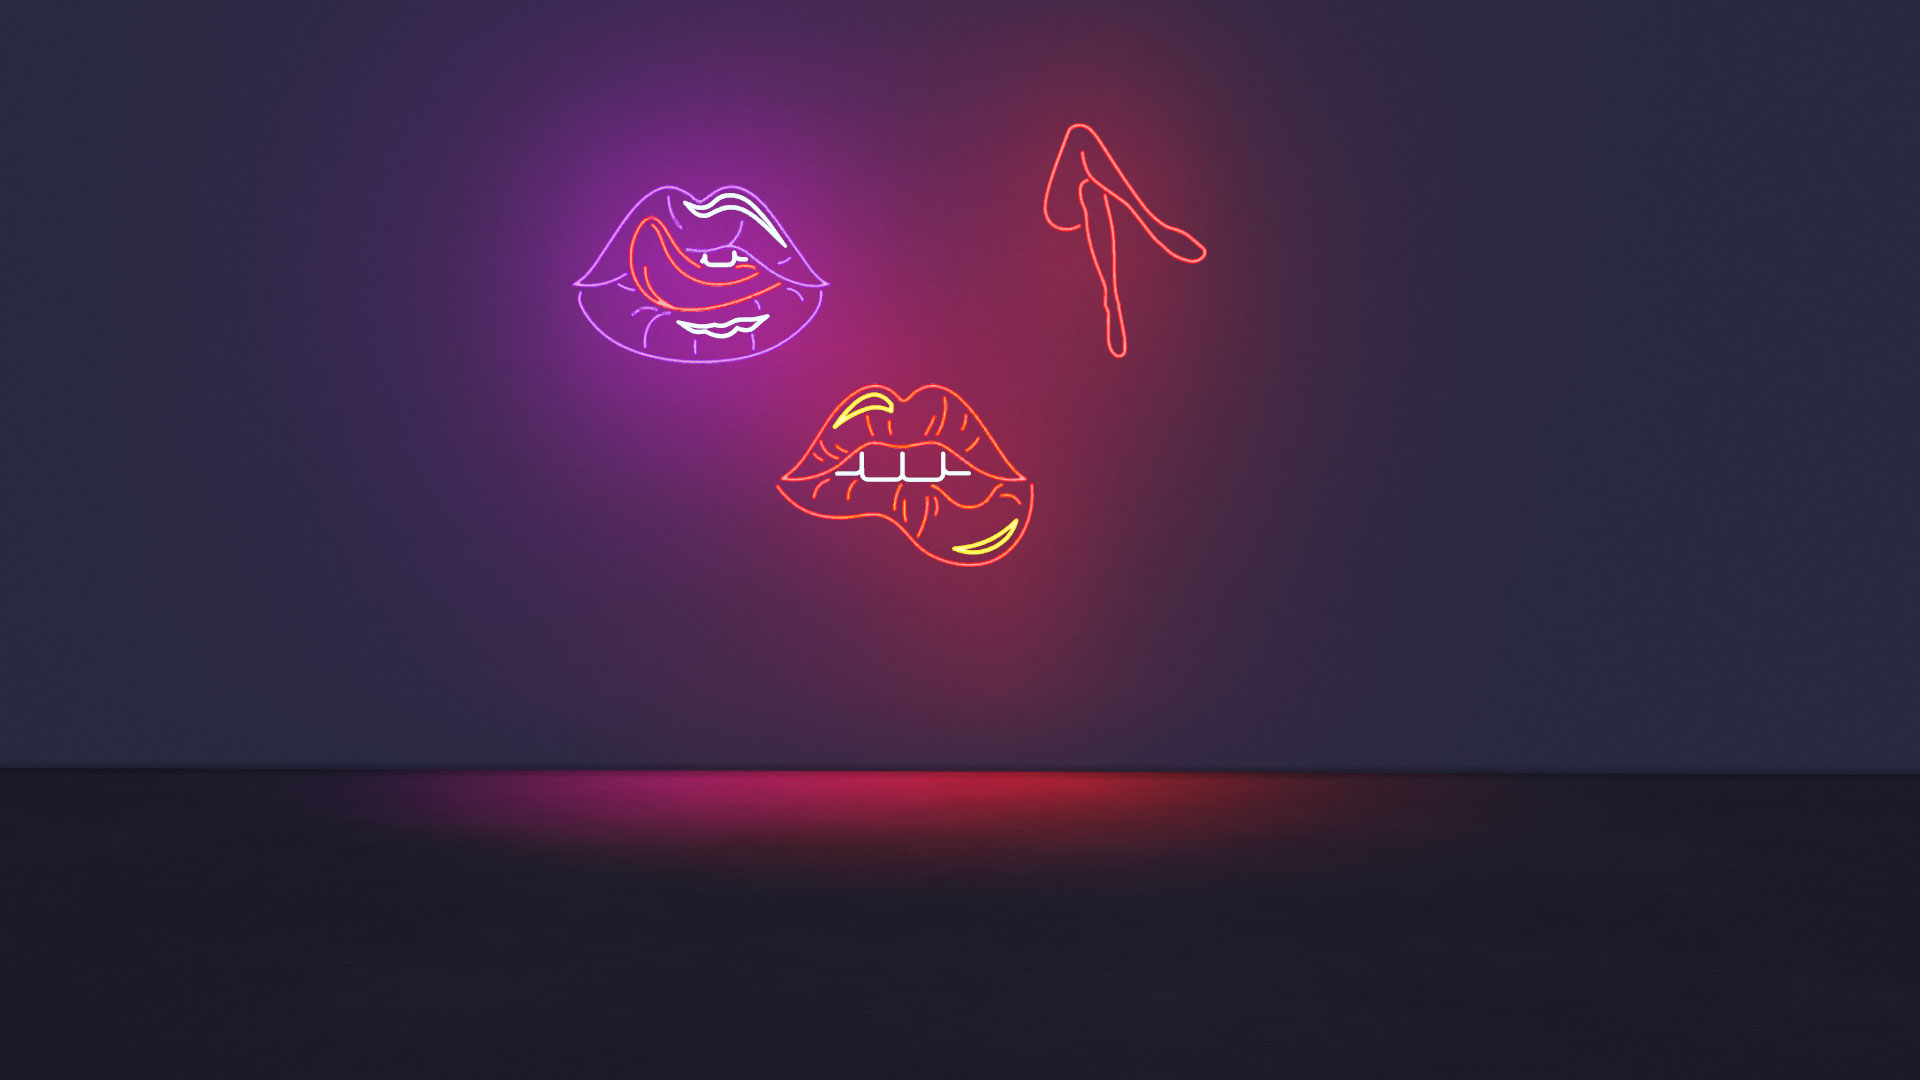 The sims 4 neon lip signs and neon legs sign